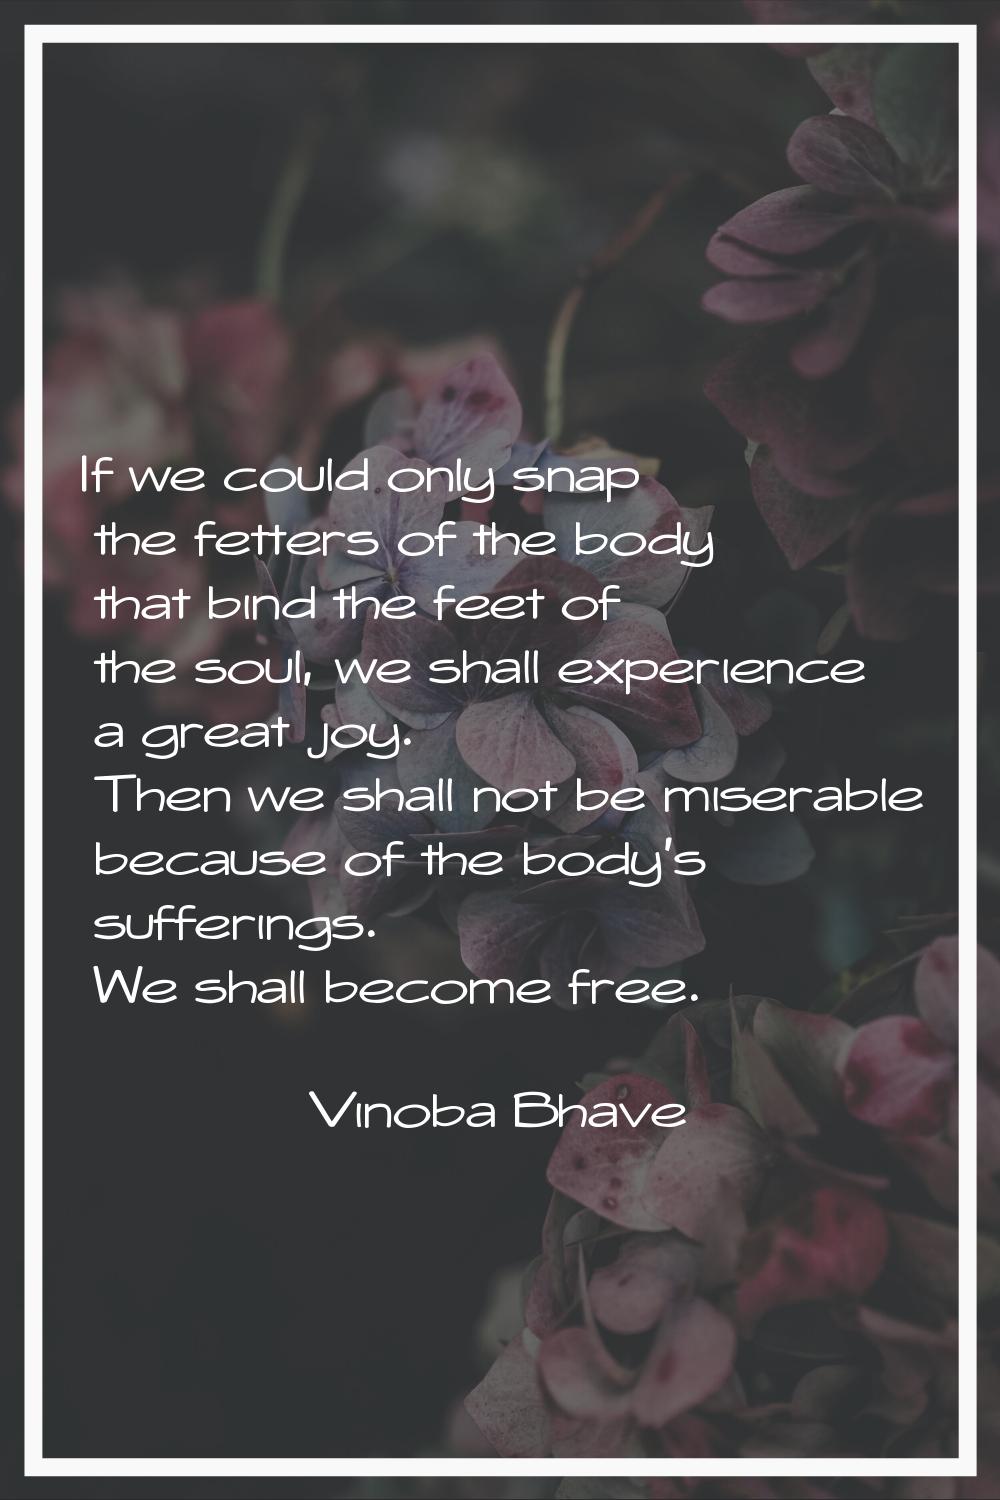 If we could only snap the fetters of the body that bind the feet of the soul, we shall experience a